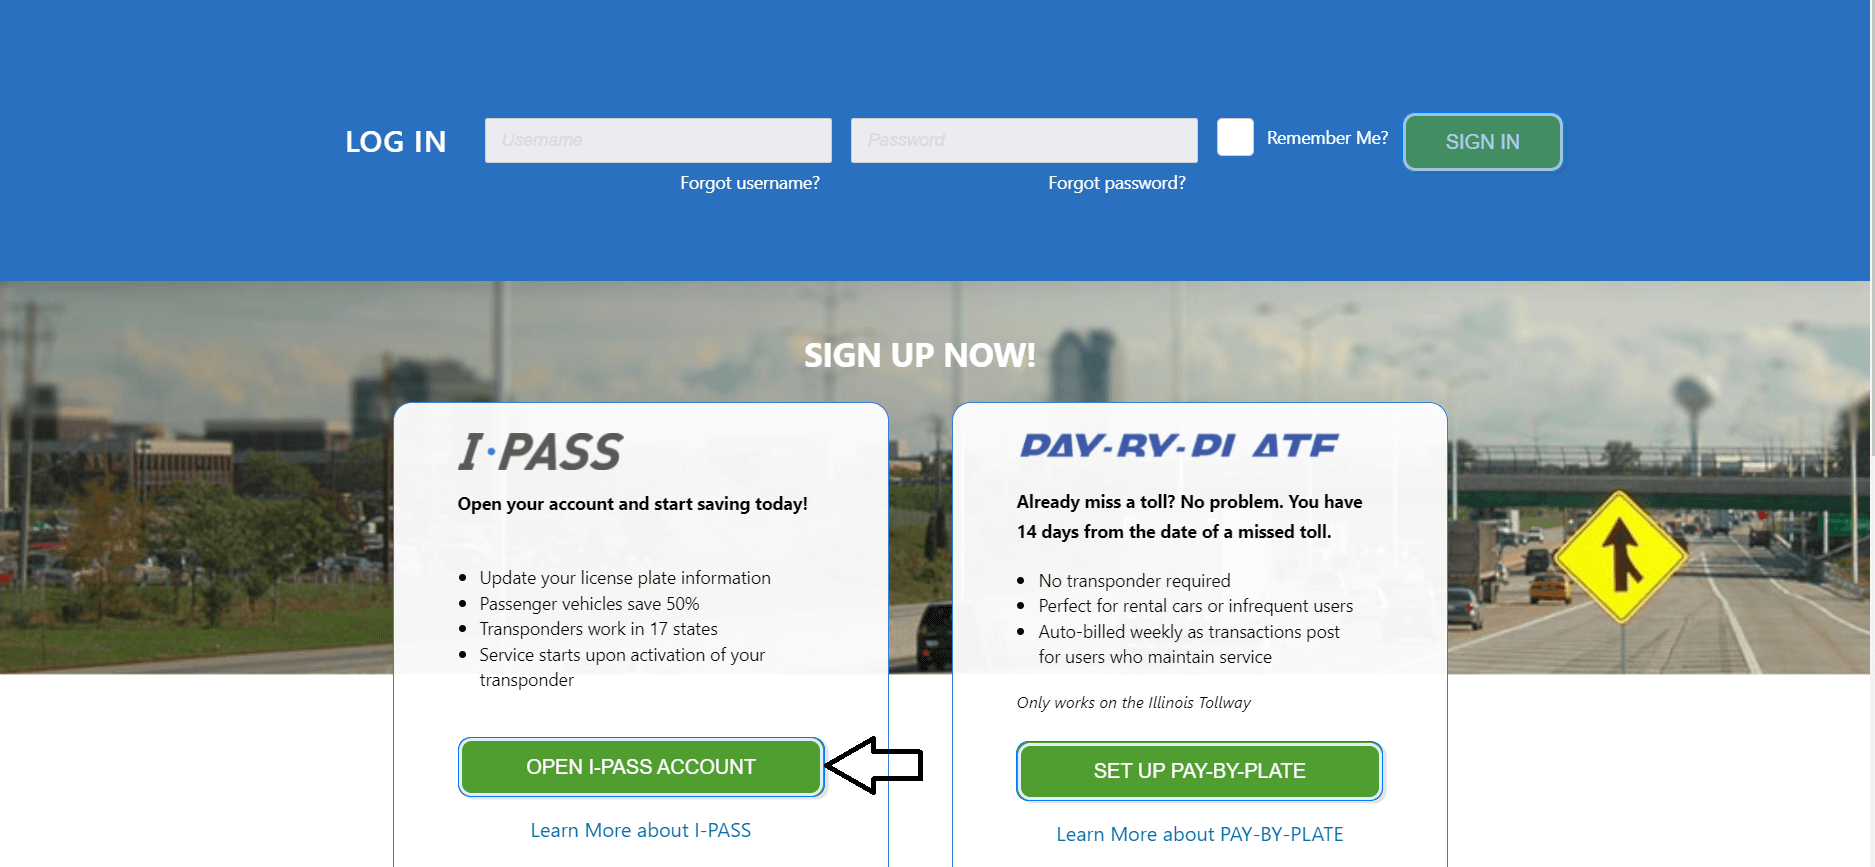 visit getipass.com and click on open i-pass account